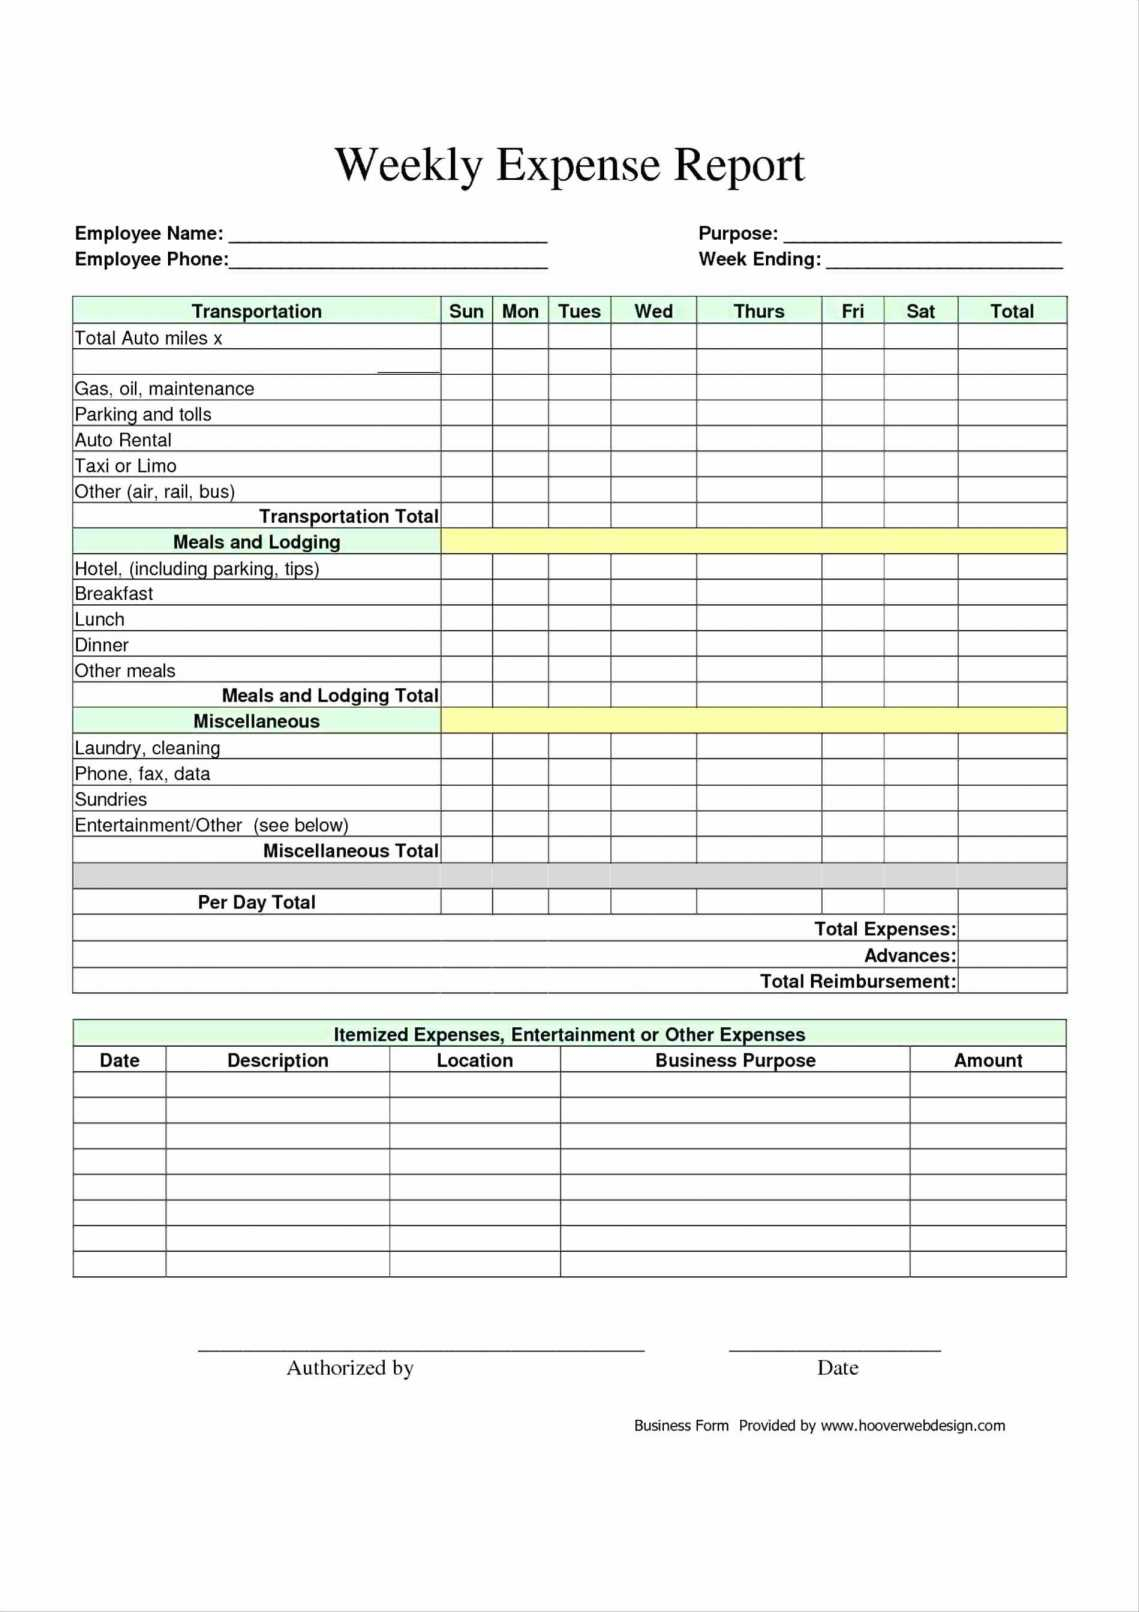 Sample Expense Form Sample Expense Report Excel And Sales Expense inside Expense Report Form Excel